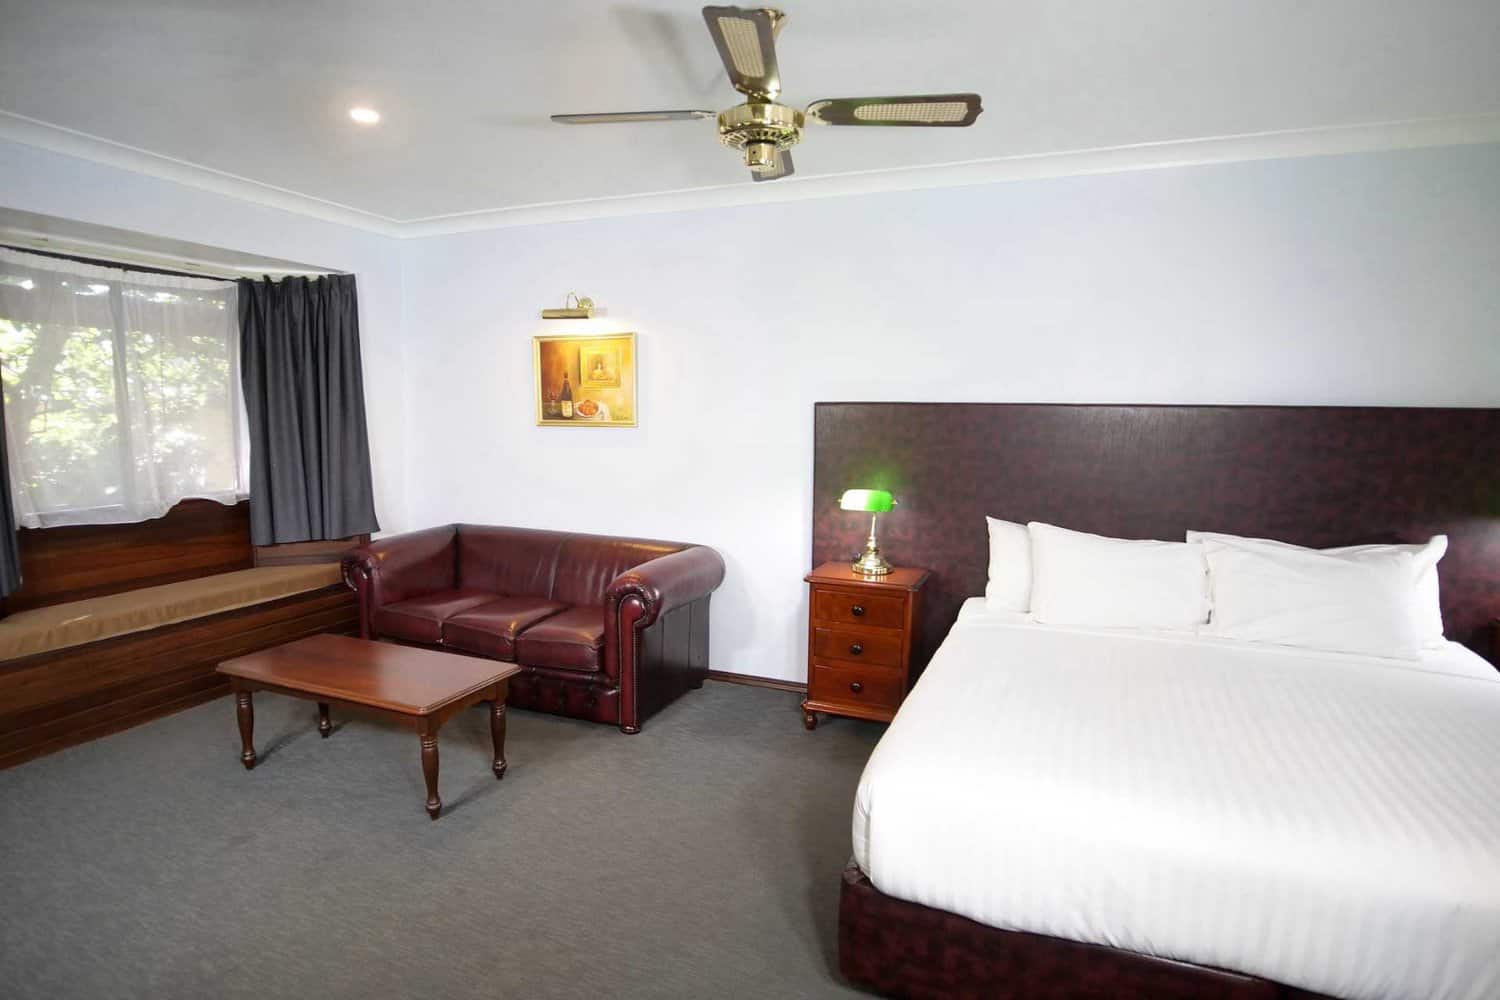 A well-appointed hotel room featuring a large bed with white bedding, a comfortable leather sofa, a wooden bench by the window, and tasteful art on the wall, illuminated by a ceiling fan light and natural daylight.